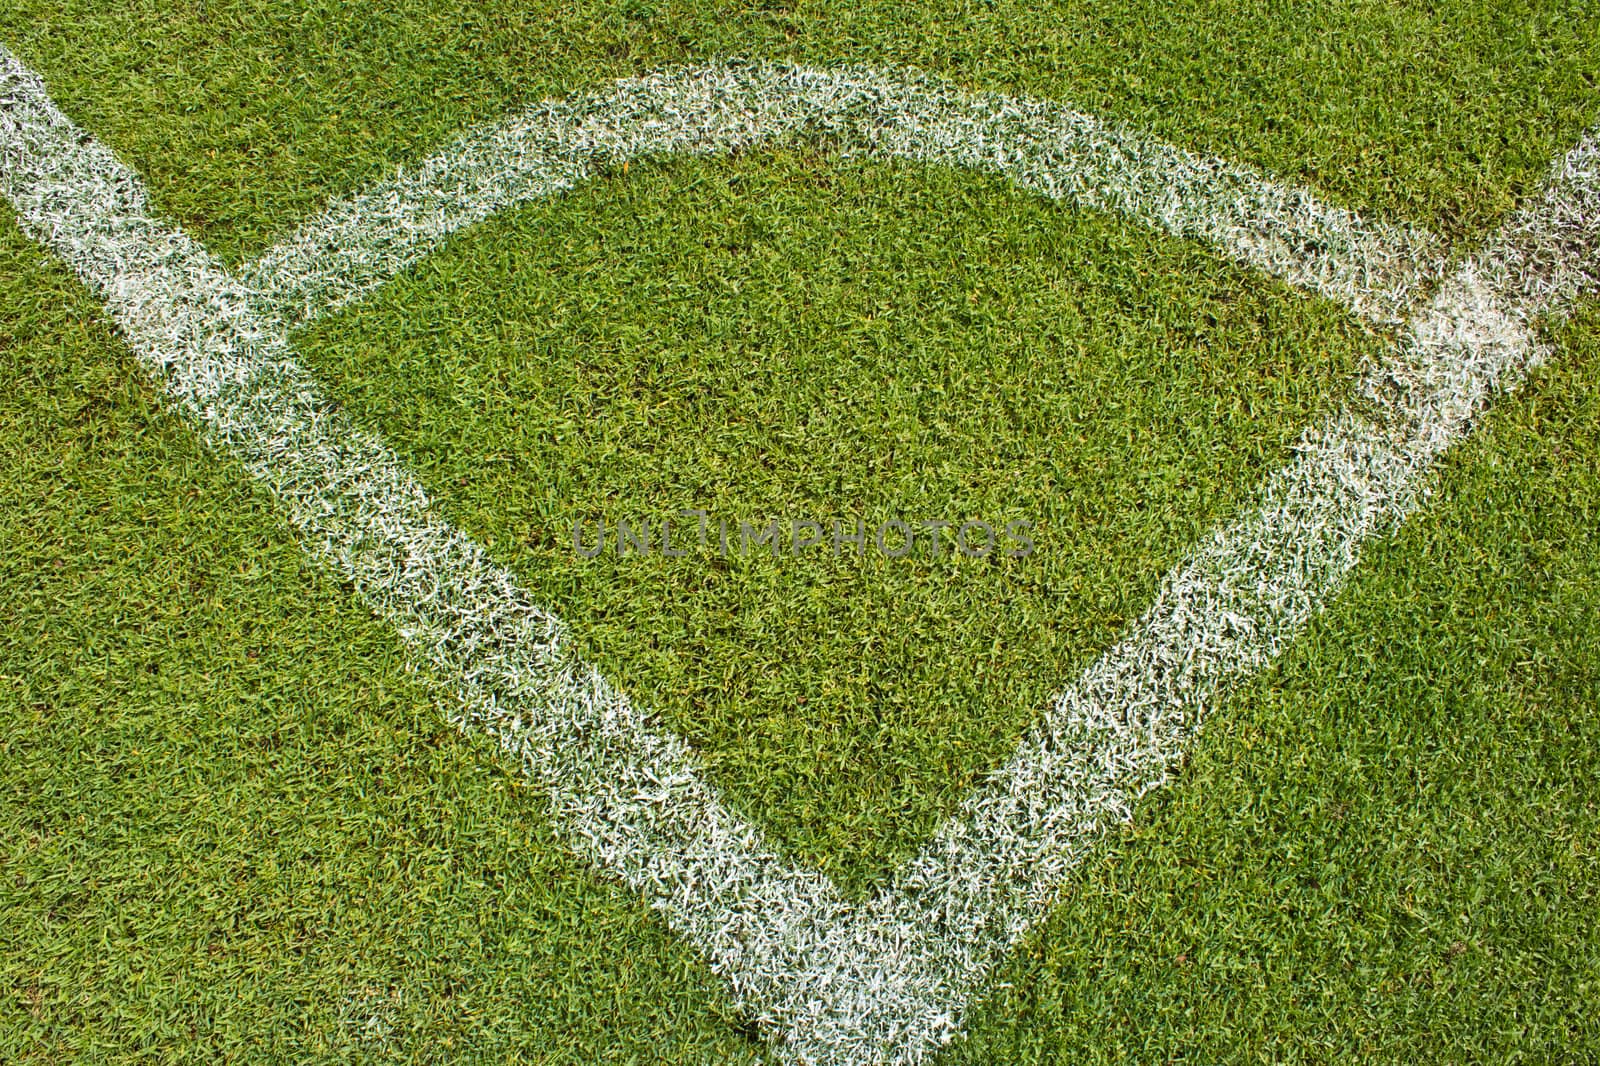 Corner of a football (soccer) field is made from synthetic lawn